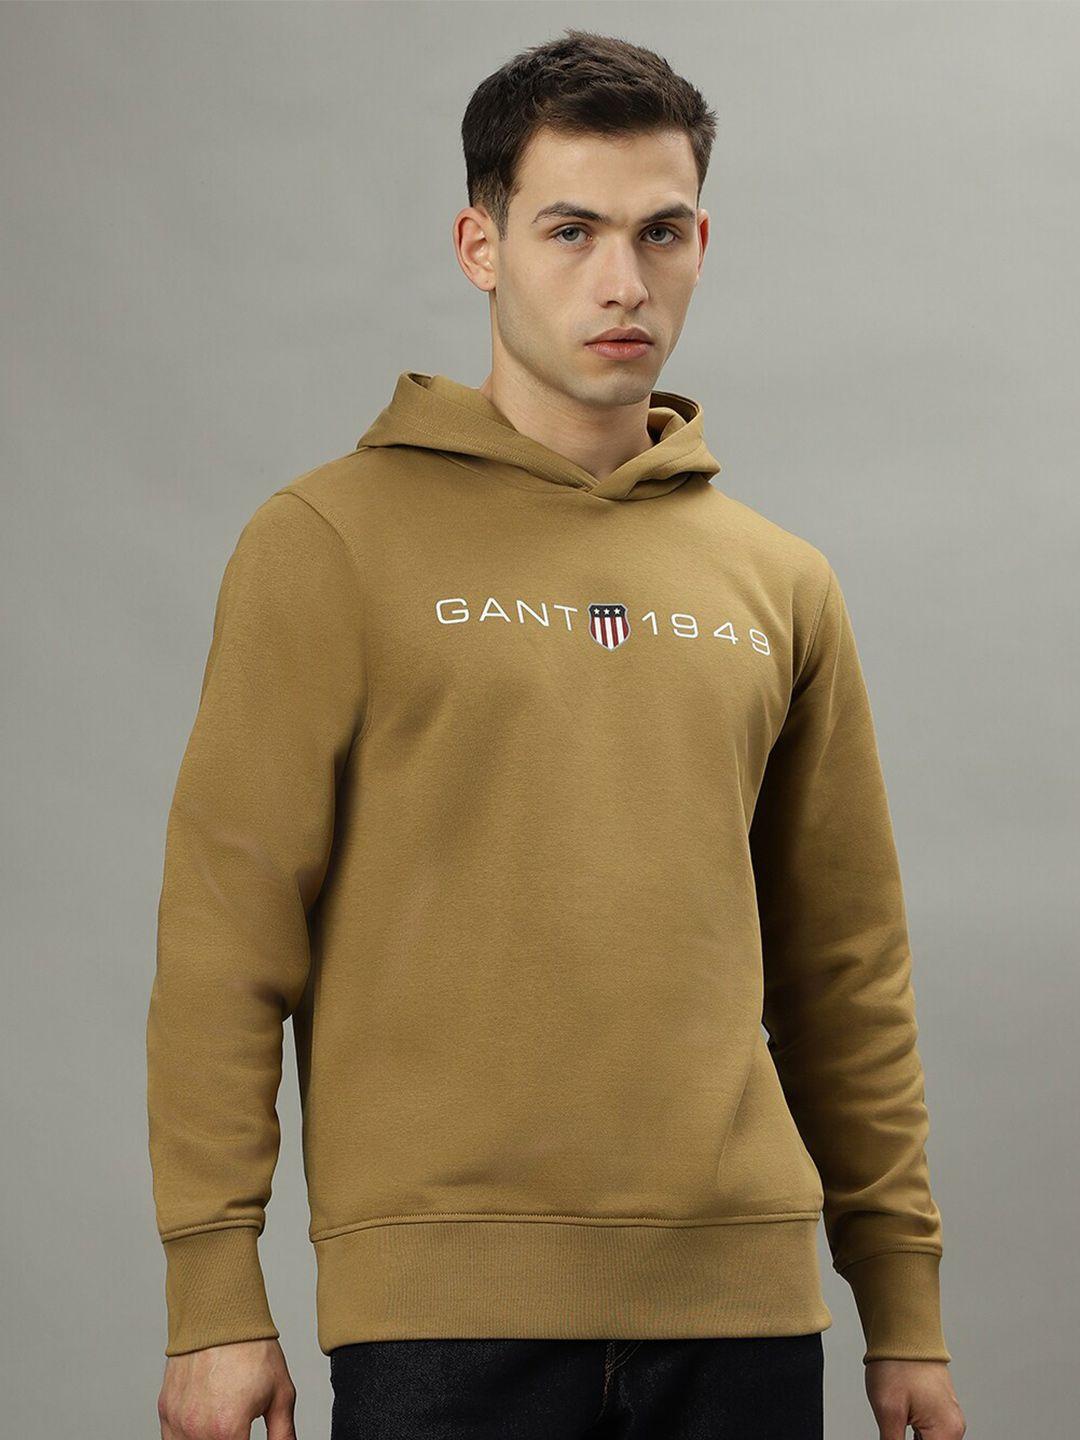 gant typography printed hooded pullover